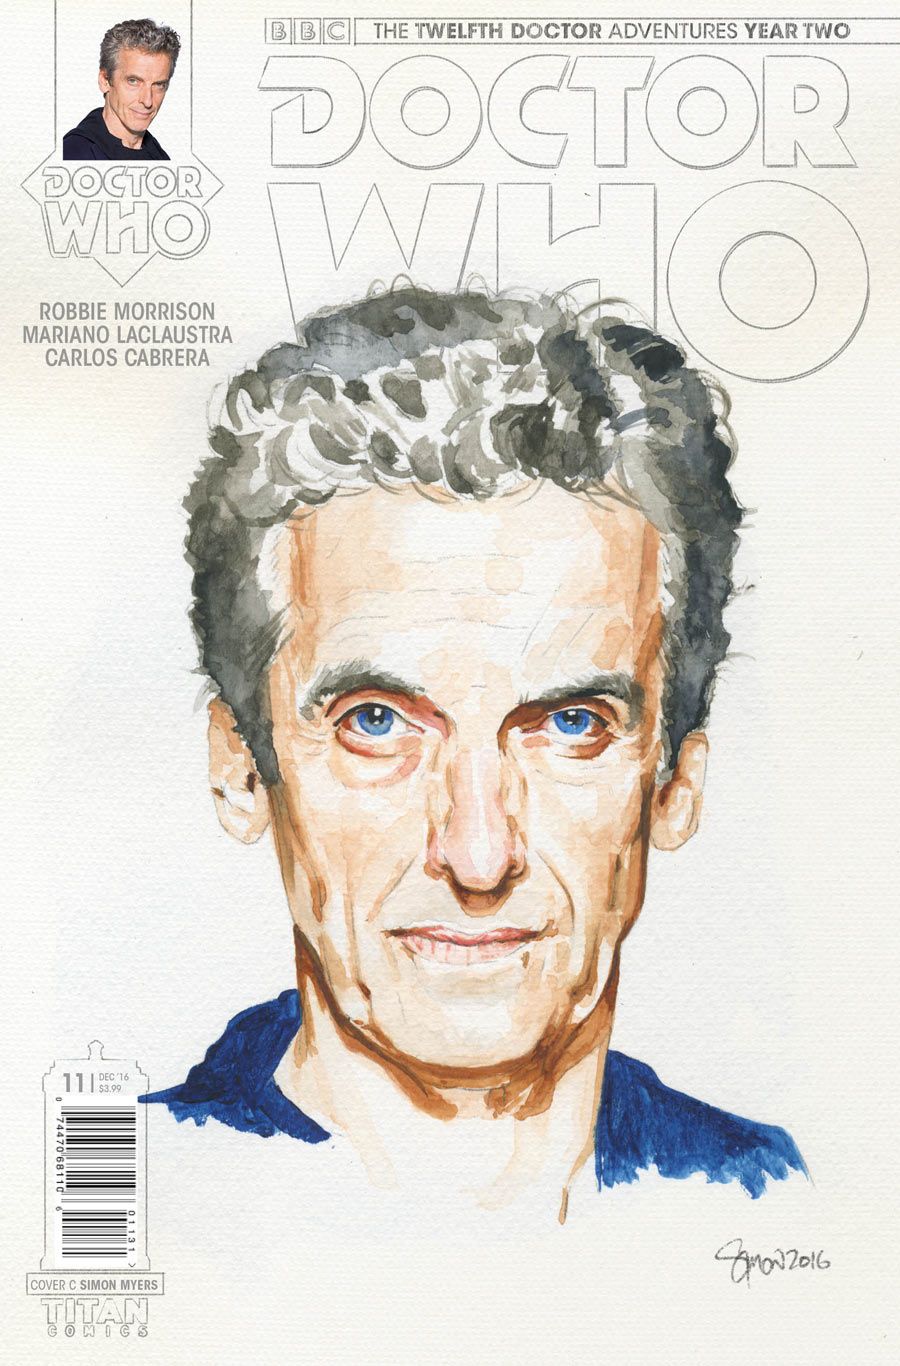 doctor_who_12d_11_cover_c_simon_myers_watercolor